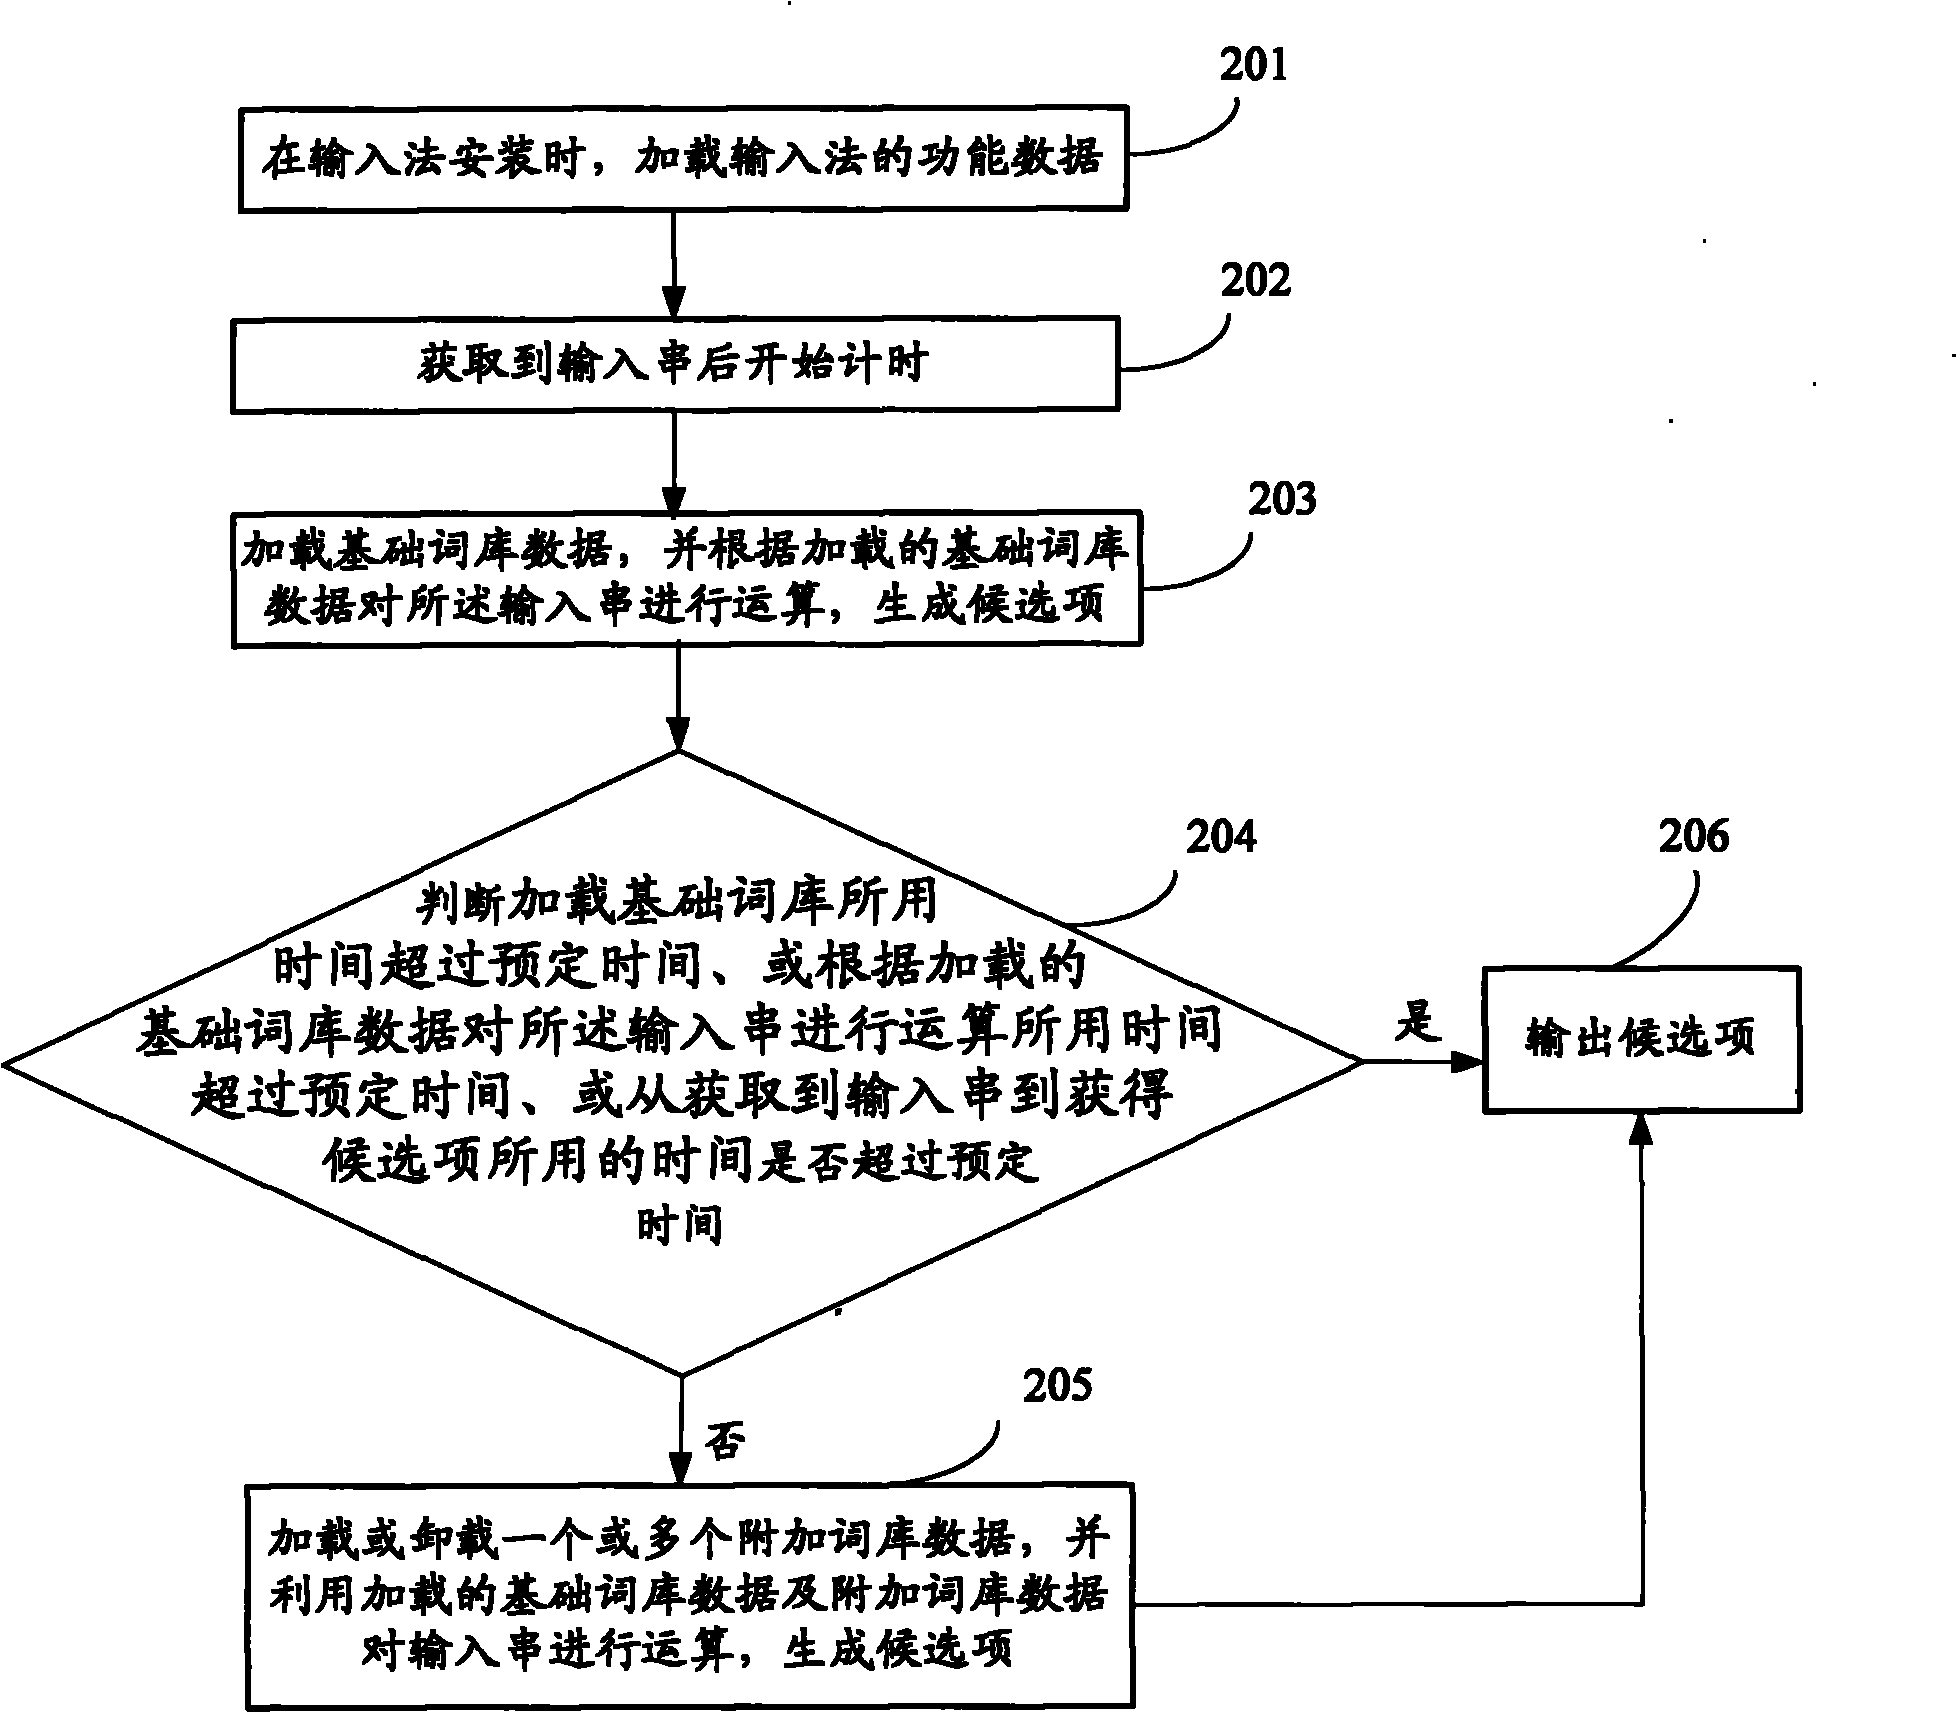 Method and device for optimizing application program performance